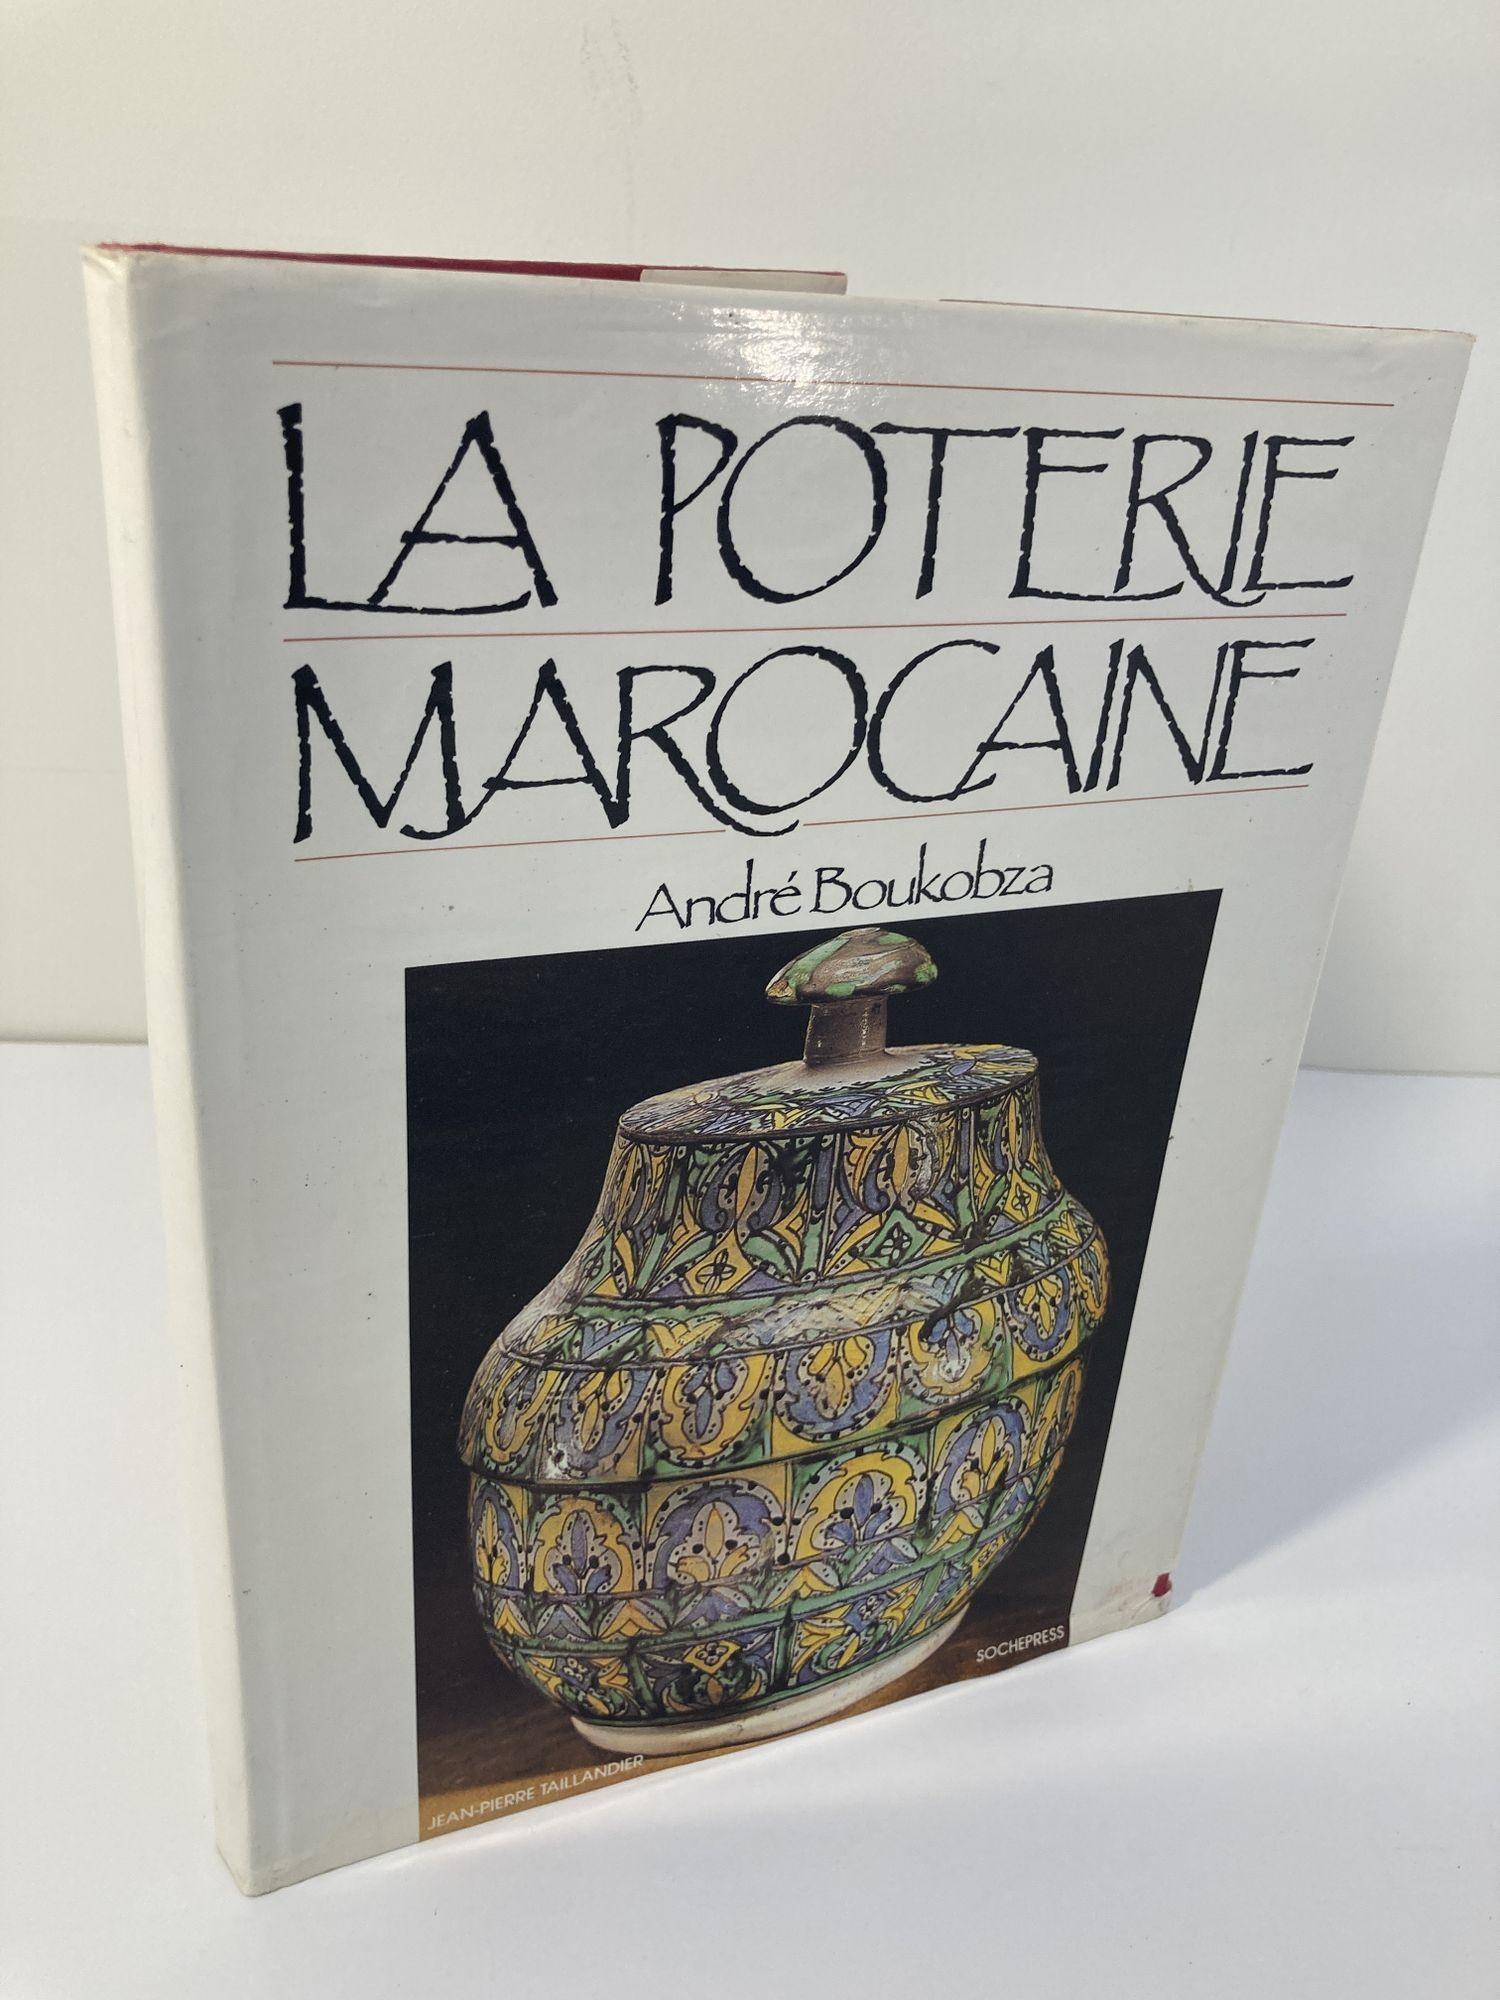 The Moroccan Pottery, french edition. Hardcover large book 1st edition 1974.
La Poterie Marocaine André Boukobza.
1974, 160 pages André Boukobza Photos with Artifacts.
The work of André Boukobza, to which any amateur or collector refers today,